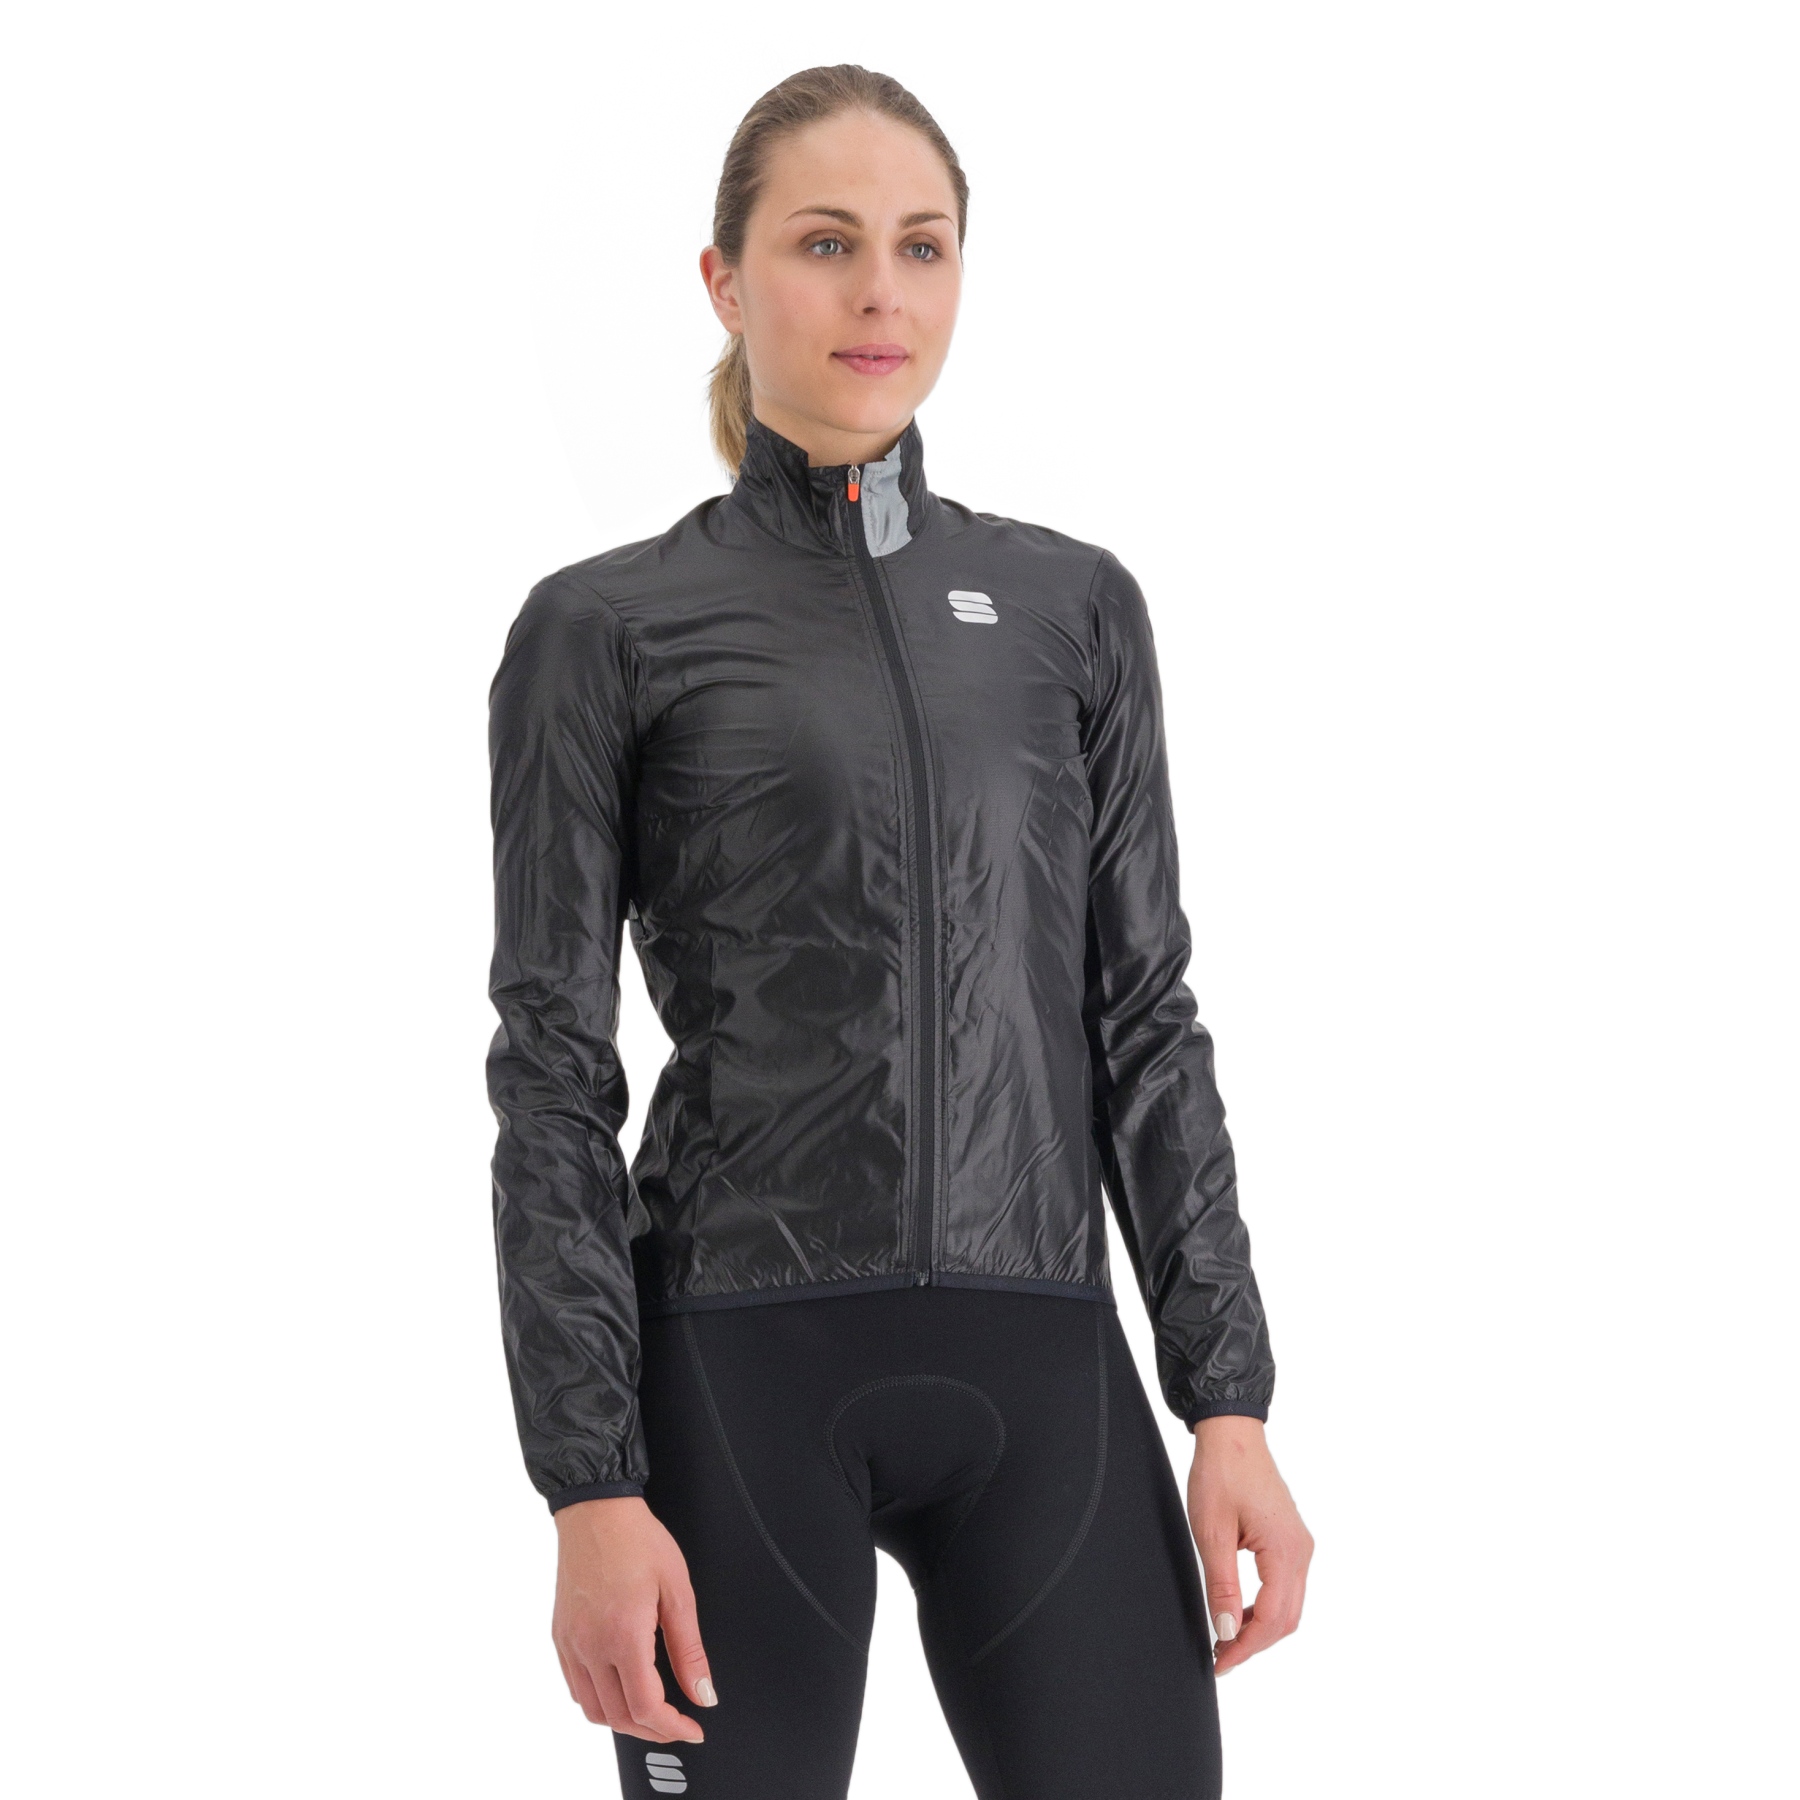 Picture of Sportful Hot Pack Easylight Jacket Women - 002 Black